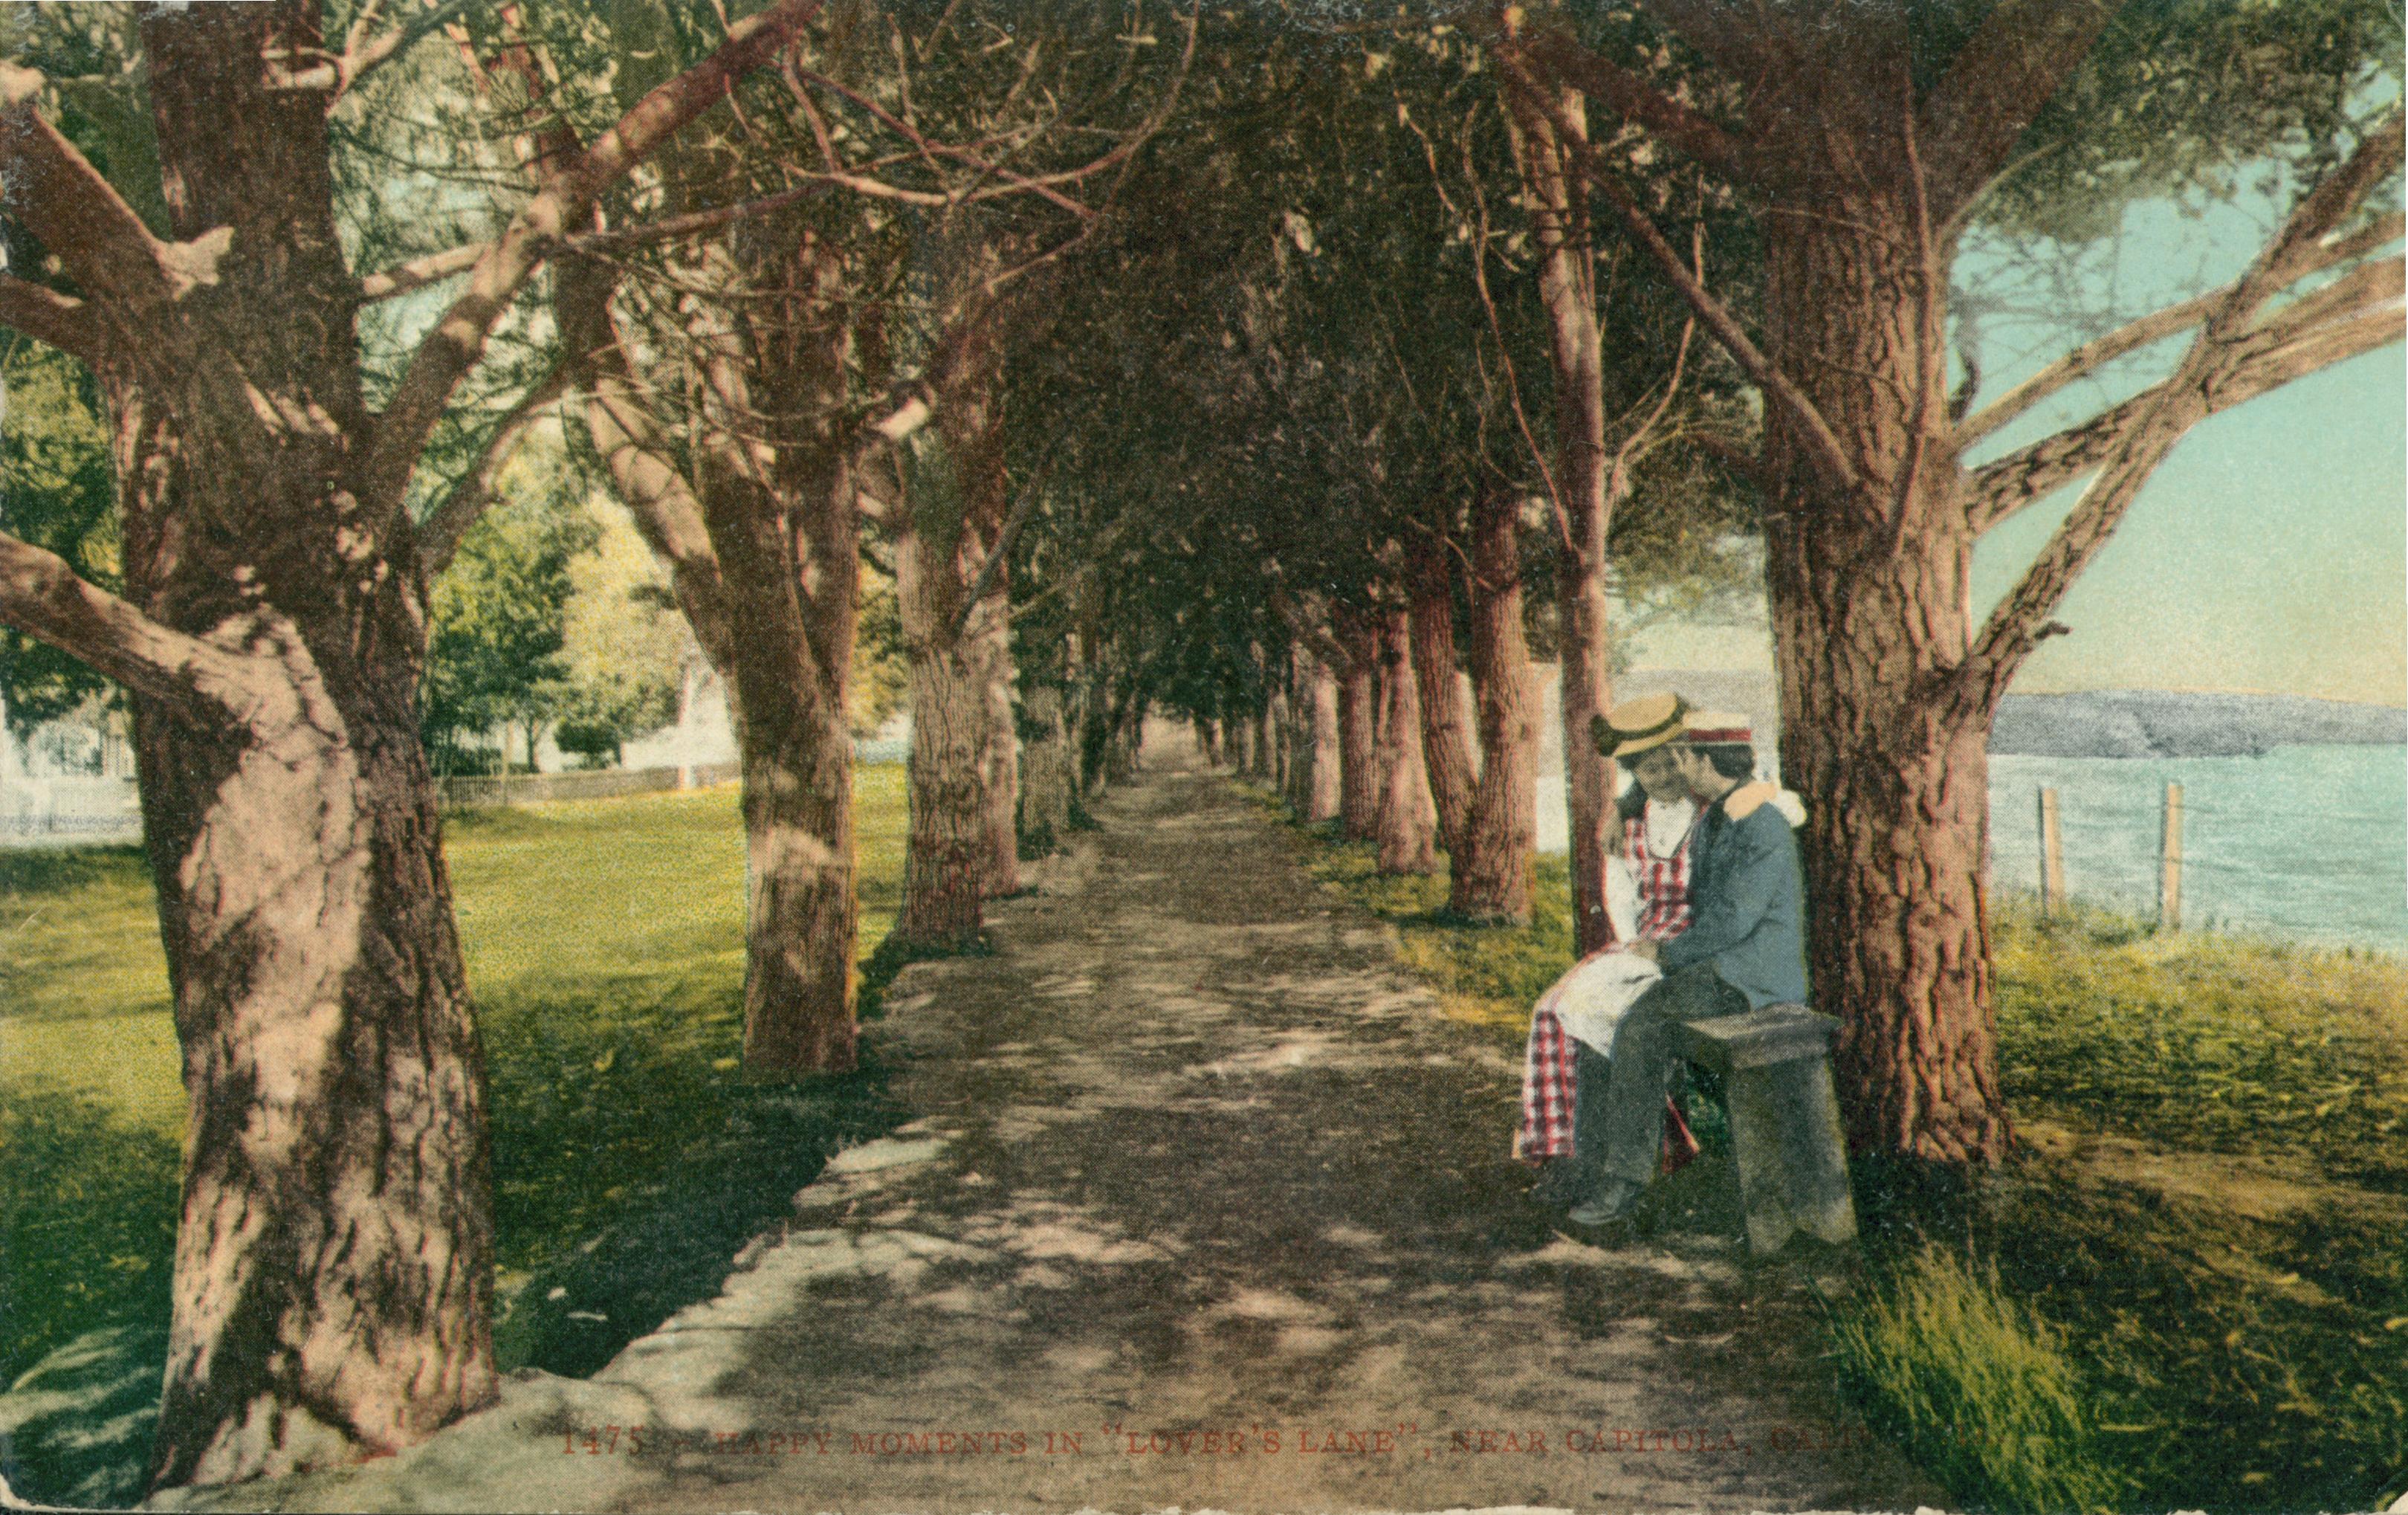 Two people embracing each other, sitting on a bench on a tree lined dirt path, parallel to the coastline and park